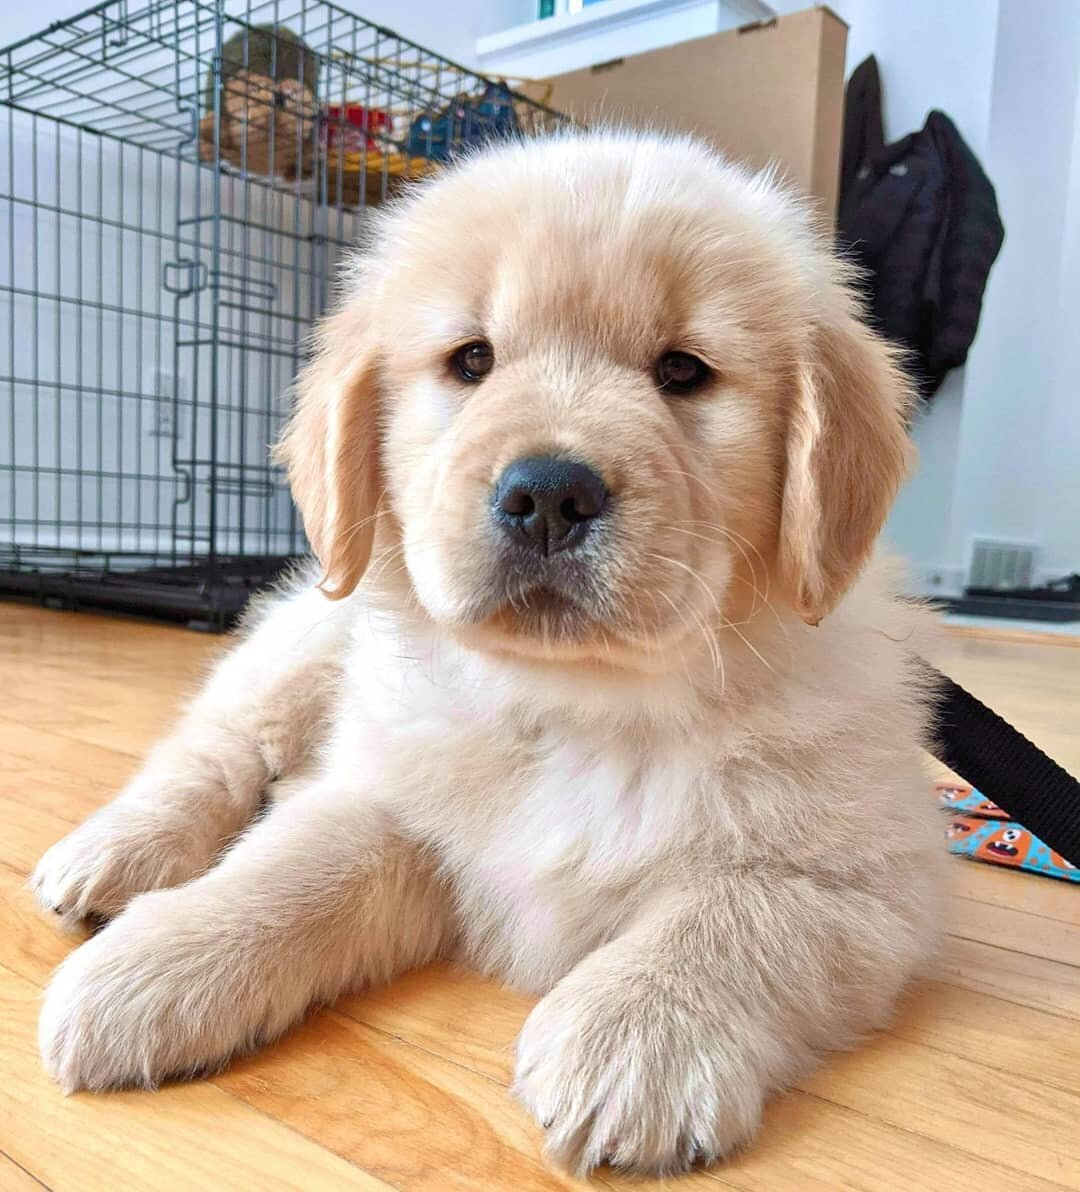 Vero has brought home her new puppy, Ralph! Welcome to the Let's Boop Snoots family Ralphie! Listen in to Episode 31 🔗 link in bio 🔗 to hear about Ralph's first week at home. ⁠
.⁠
.⁠
.⁠
.⁠
.⁠
.⁠
.⁠
.⁠
.⁠
.⁠
#pupsofgolden #puppylove #goldenretriever